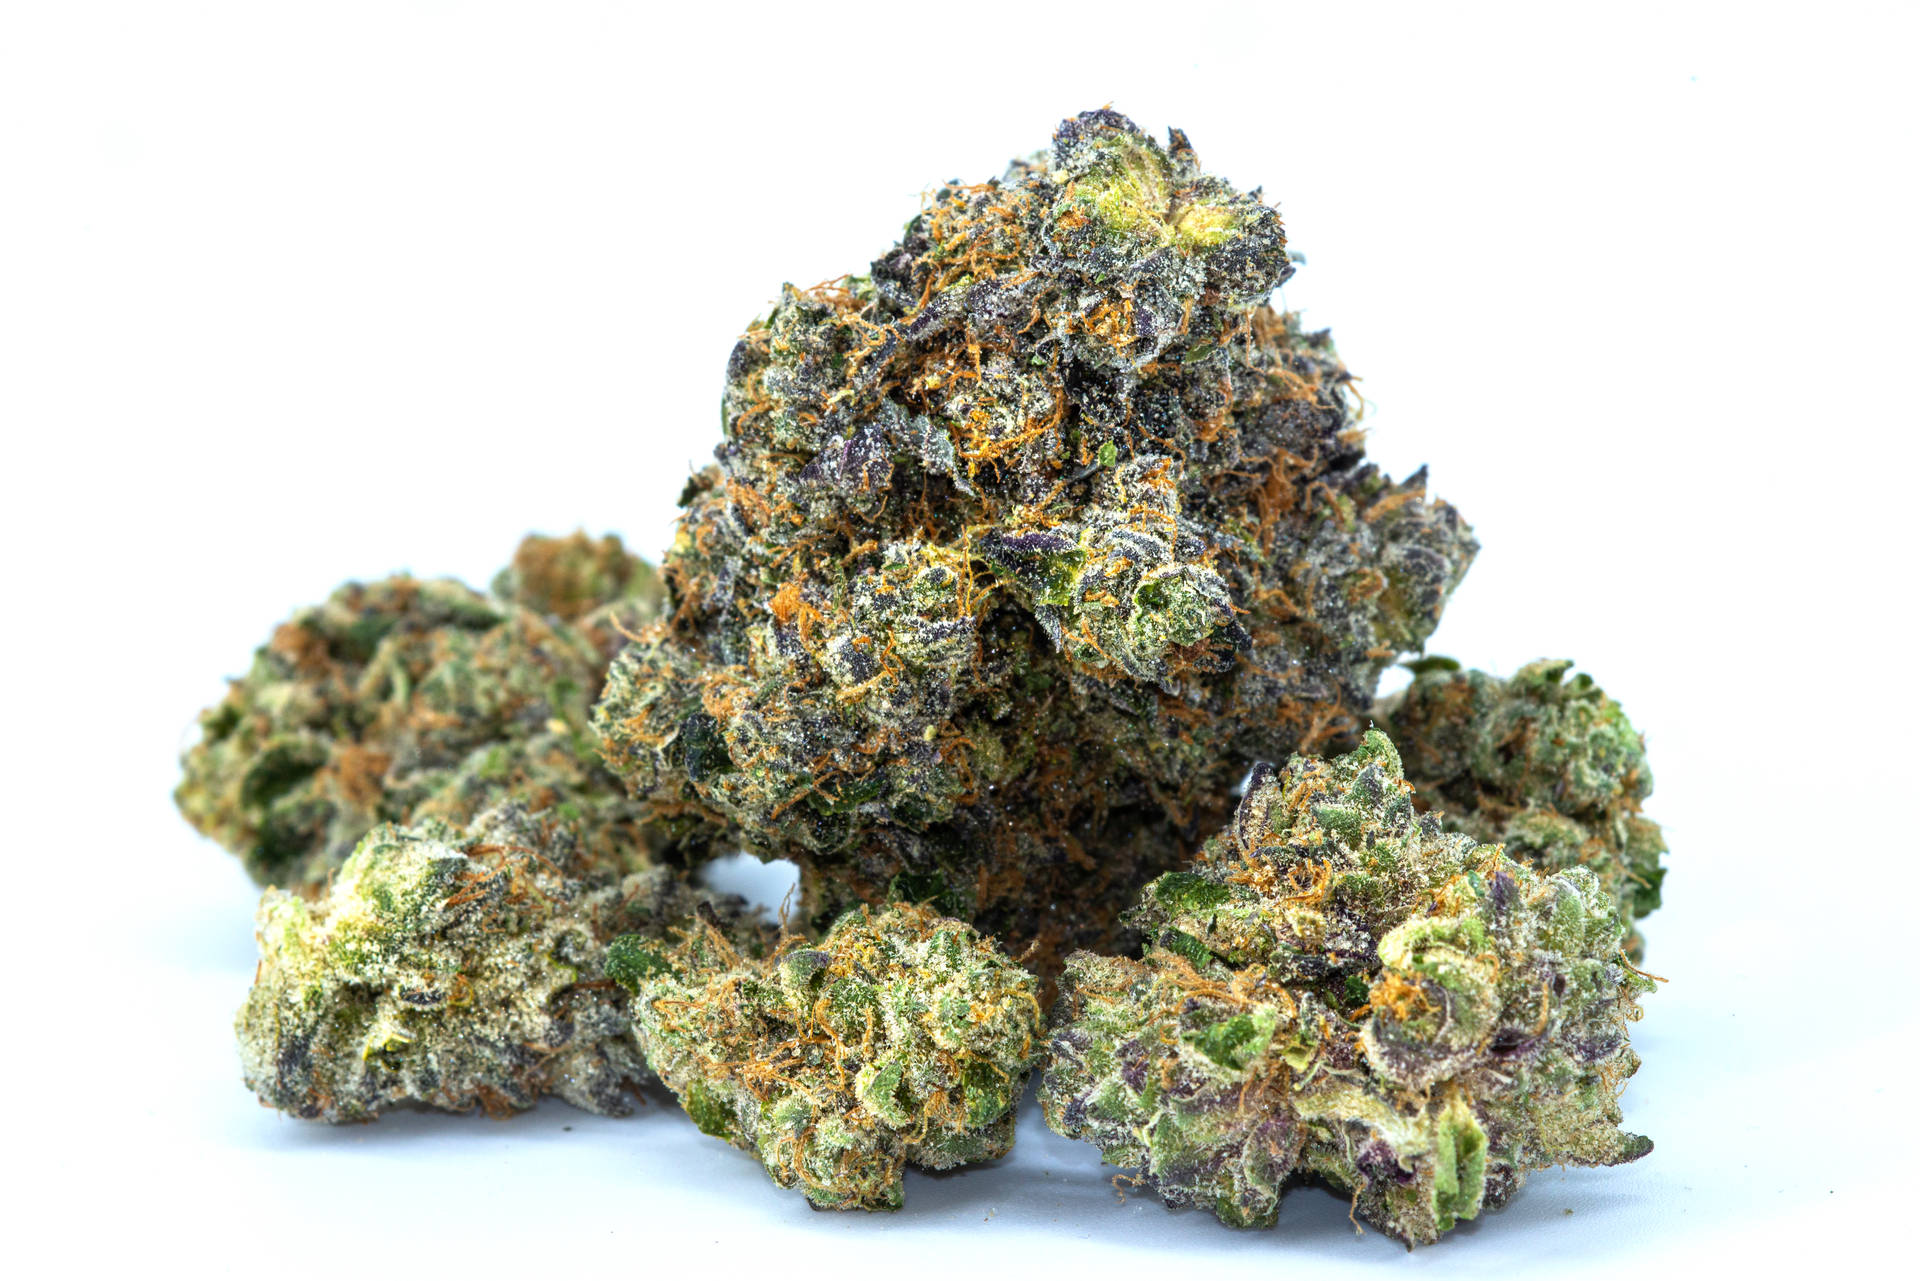 Weed 6840X4565 Wallpaper and Background Image